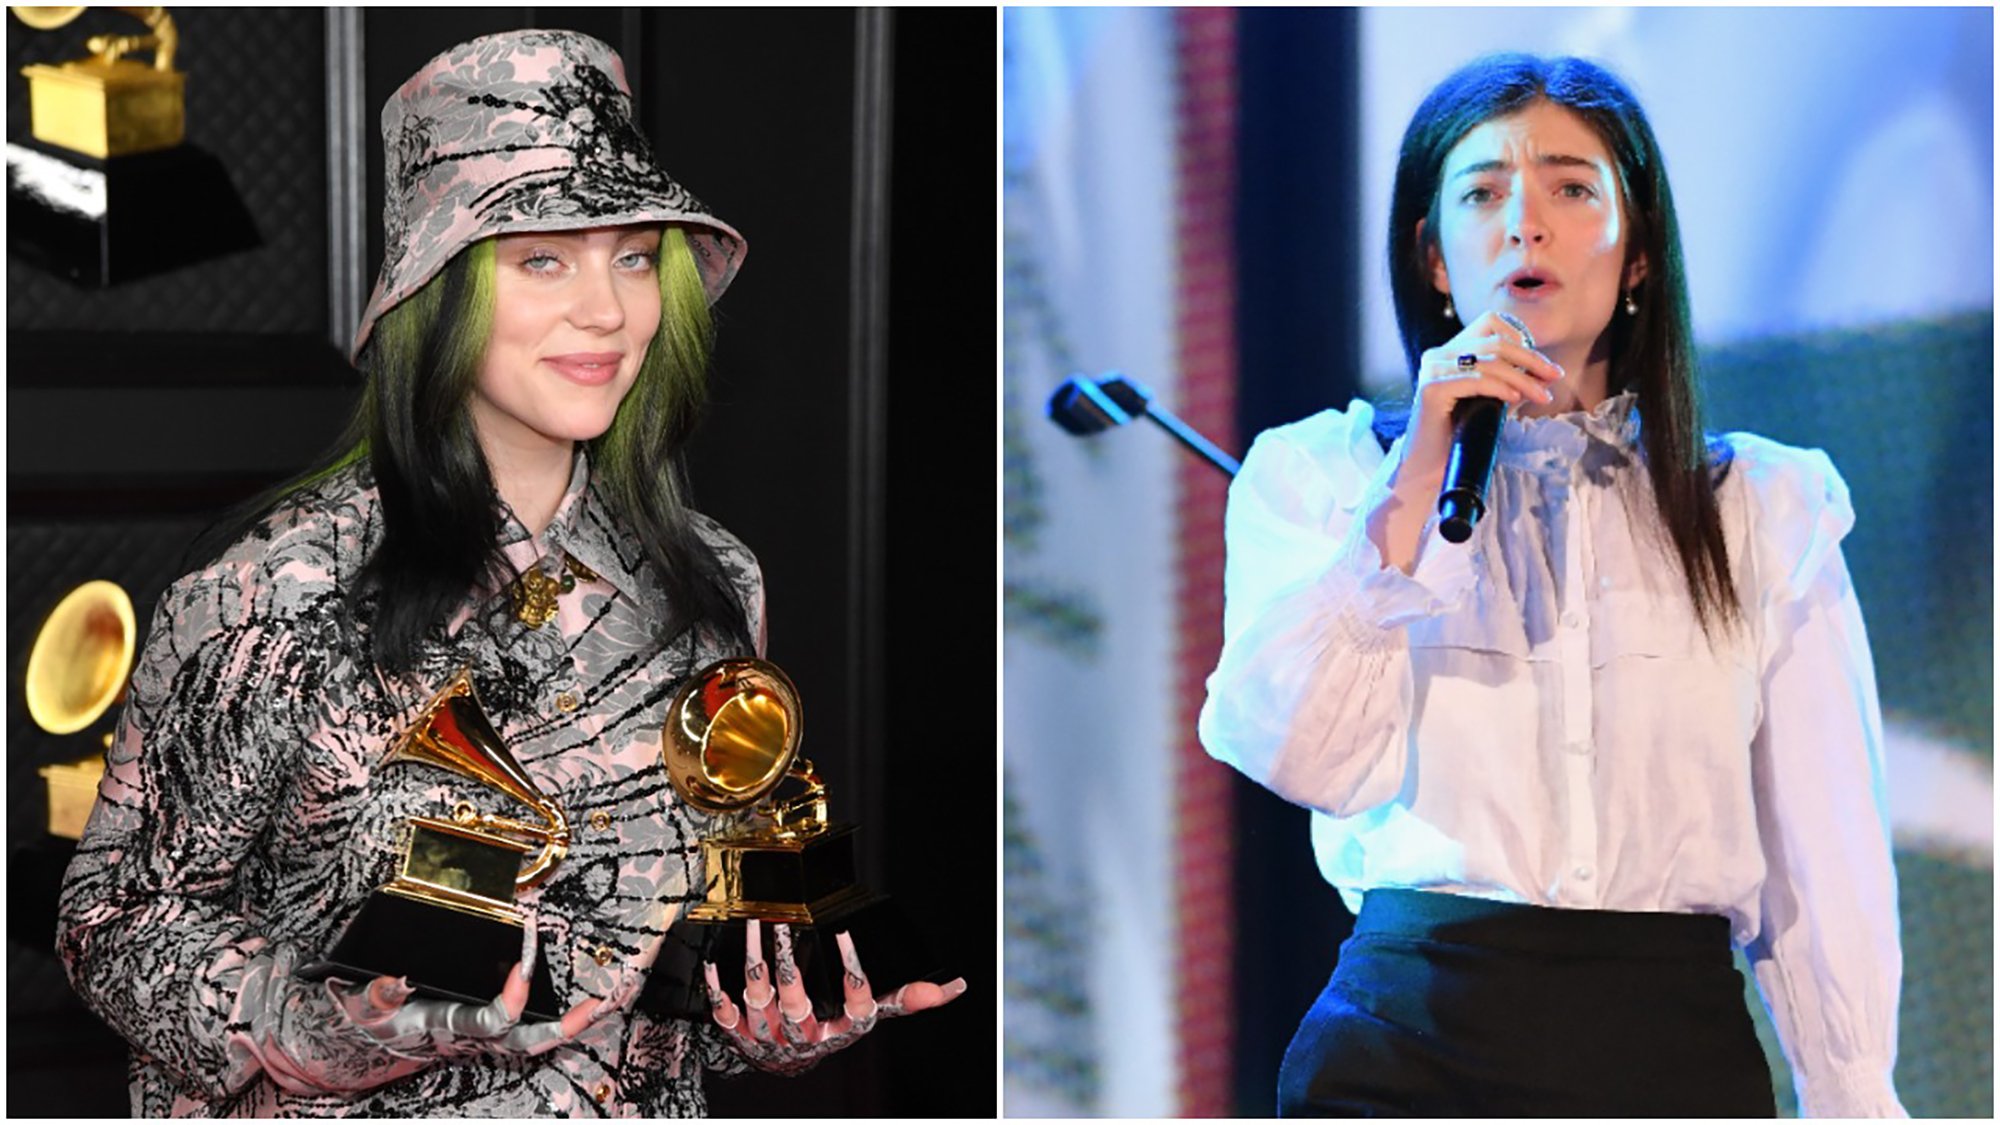 Billie Eilish at the 2021 Grammy Awards / Lorde performs at the You Are Us/Aroha Nui Concert in 2019